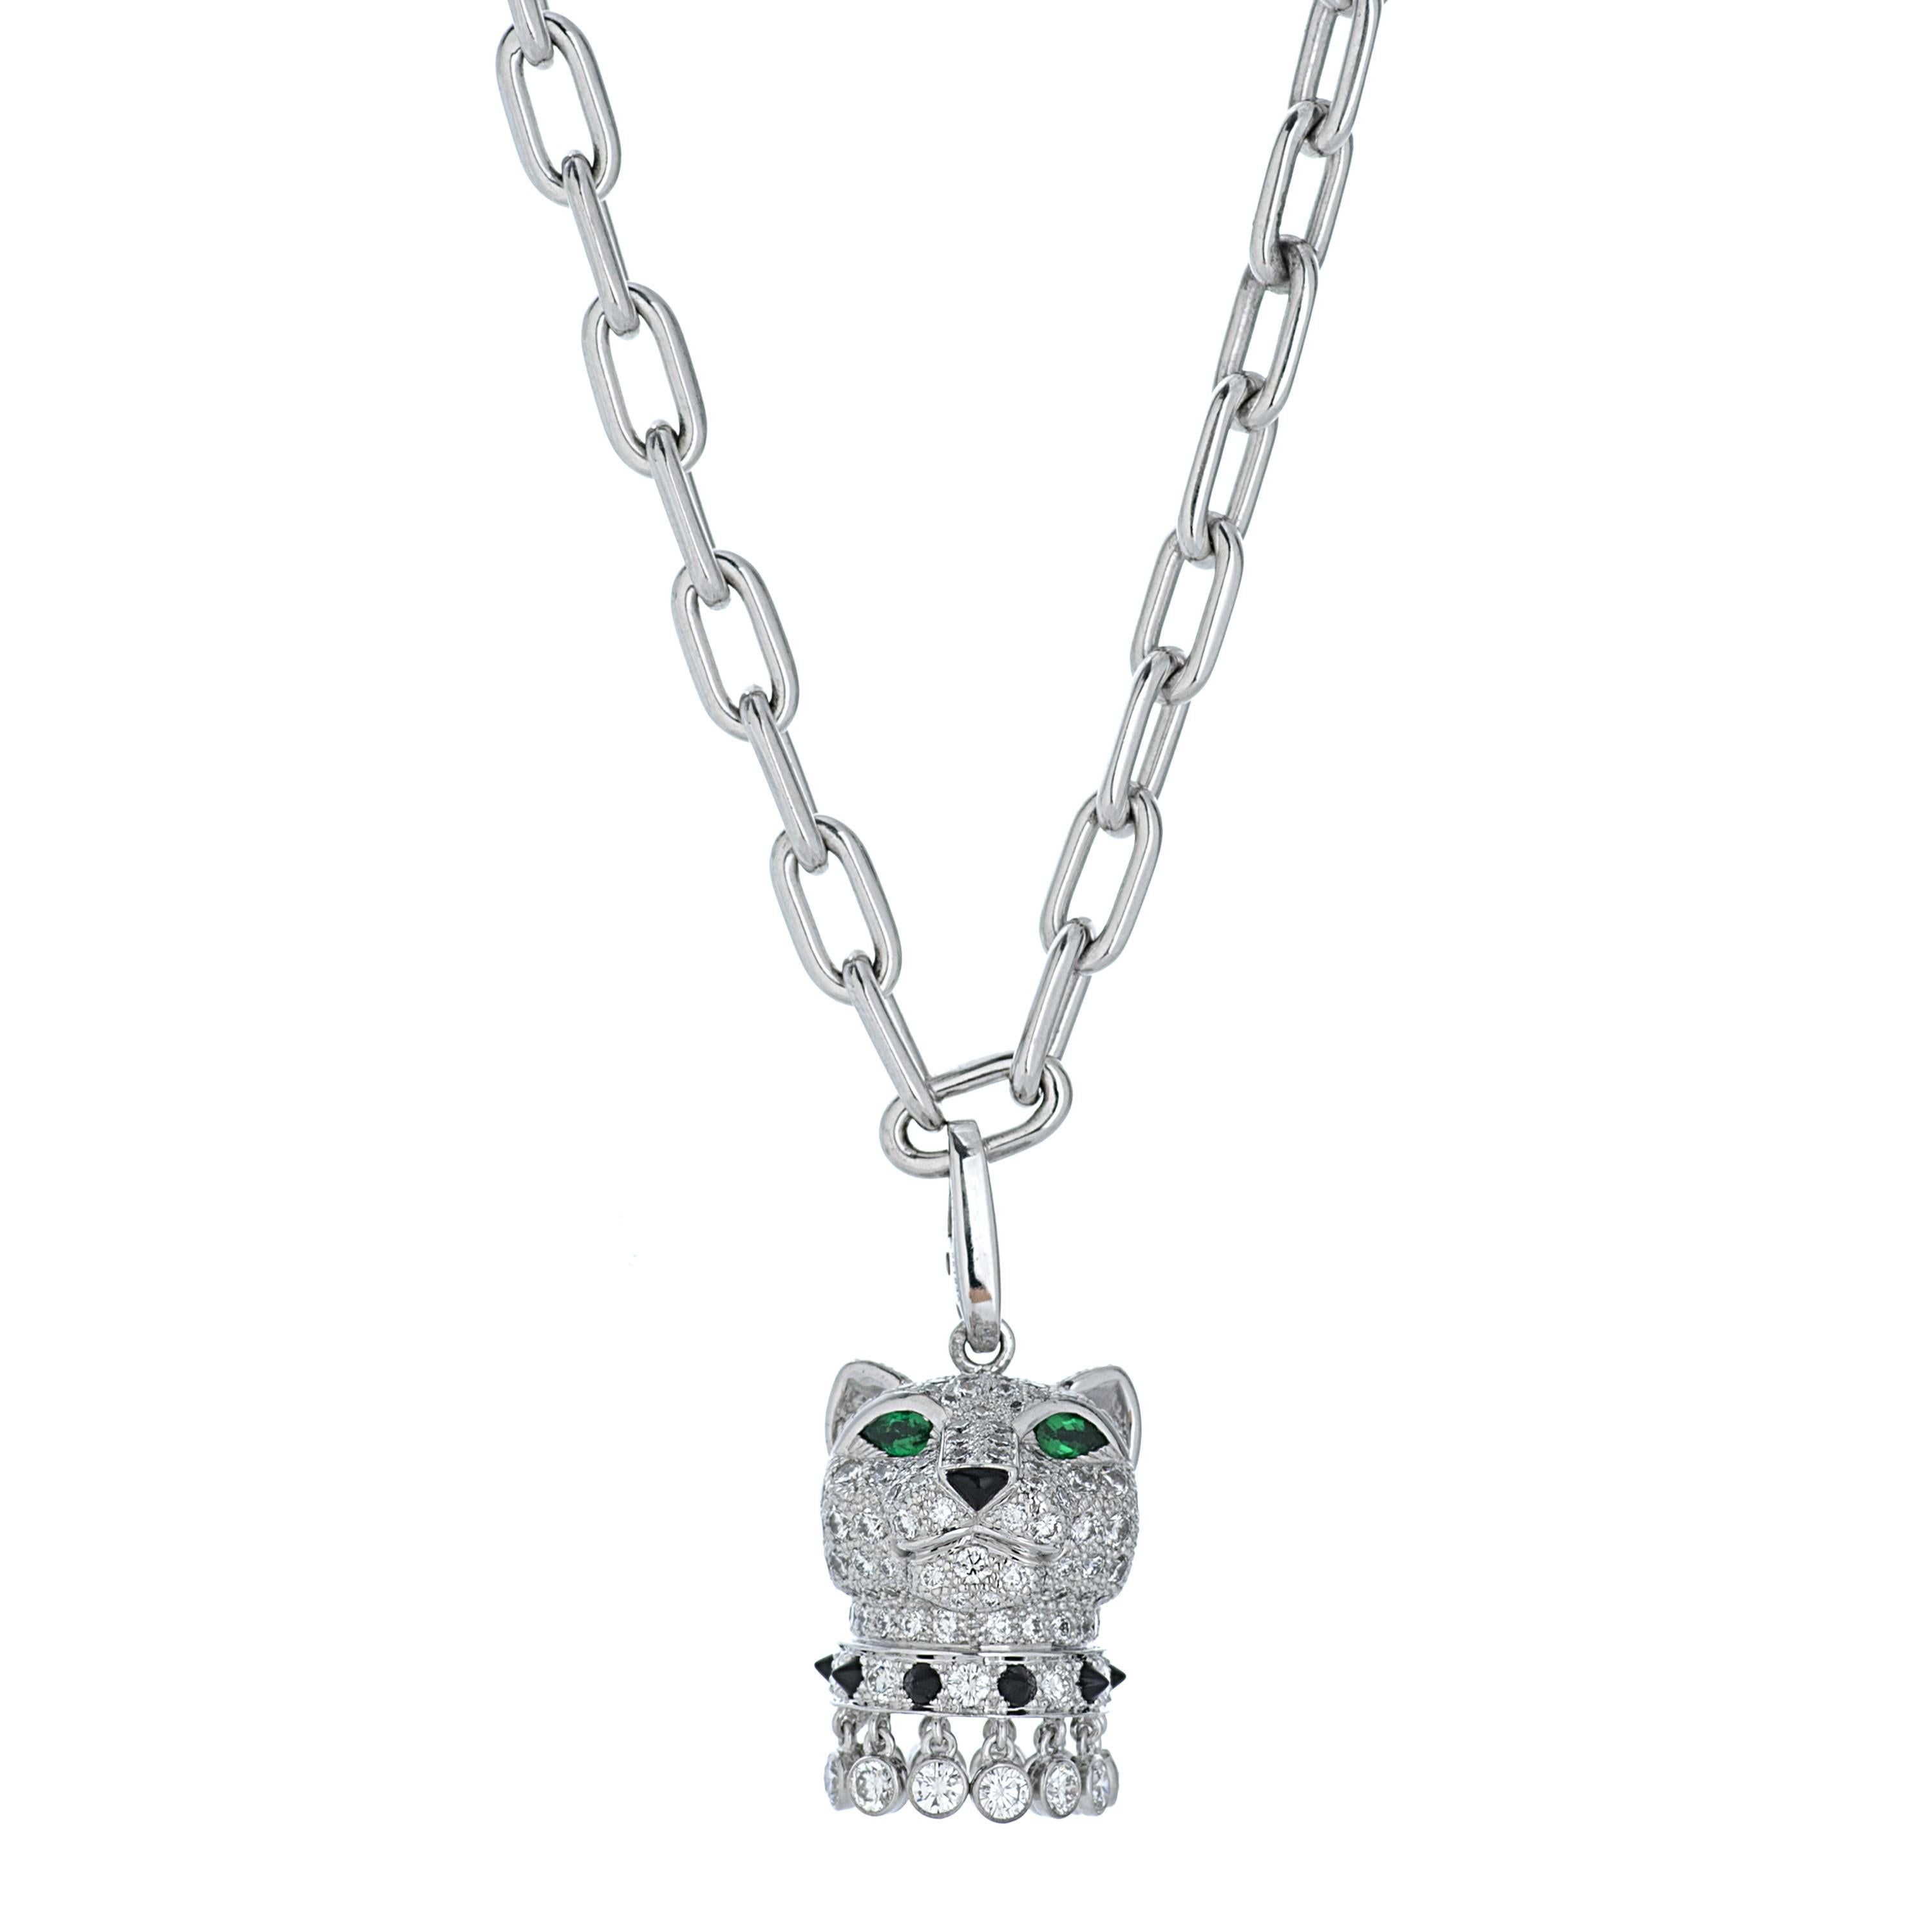 This Panthere De Cartier panther head pendant necklace features approximately 5.00 carats of round brilliant cut diamonds with F color and VVS-VS clarity.  The diamonds are accented by two emerald eyes as well as an onyx nose and studded collar. 